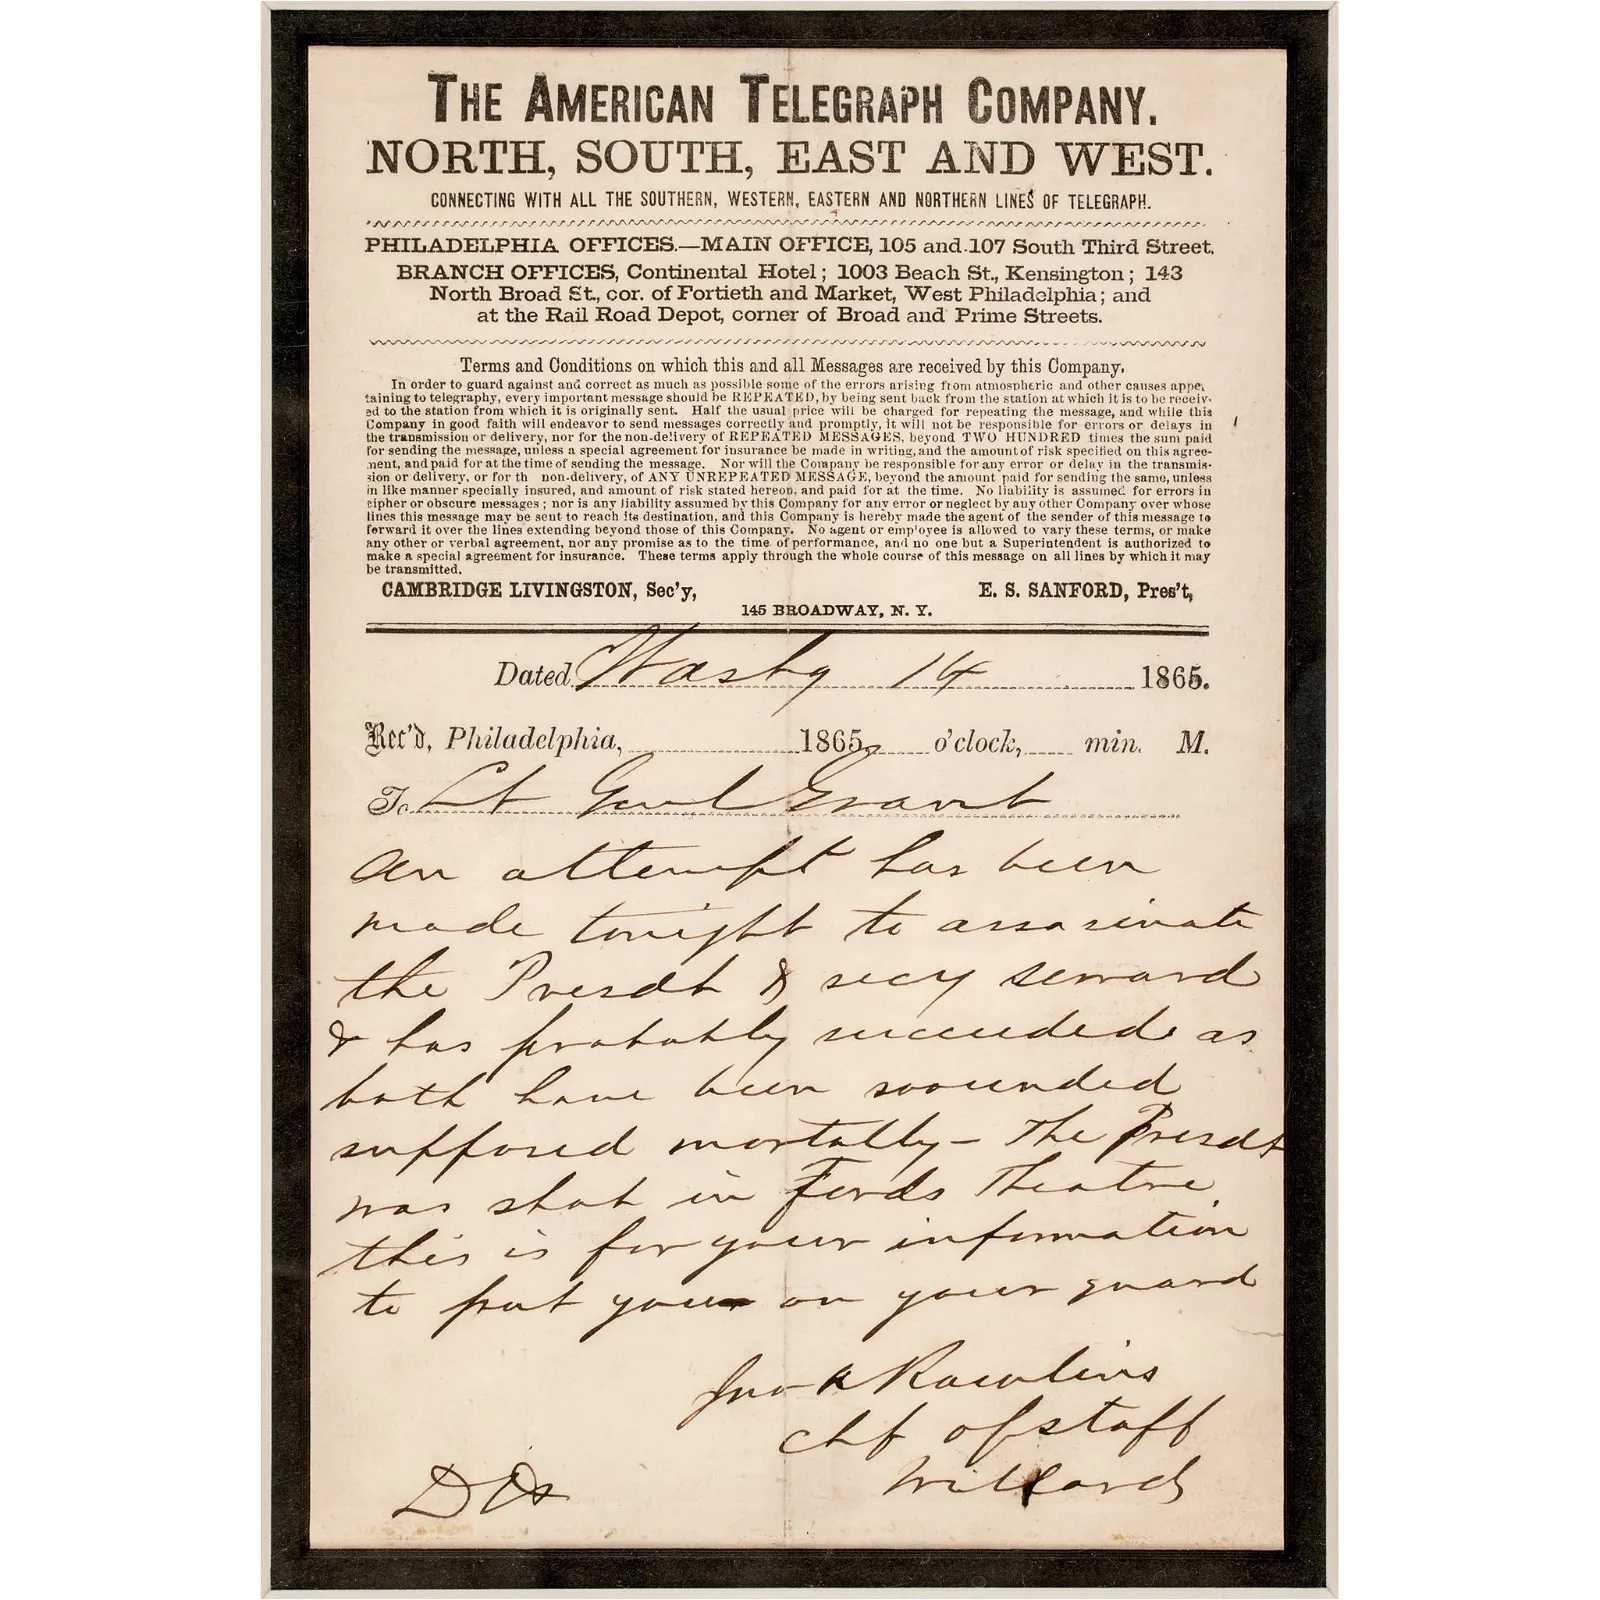 Telegram informing U. S. Grant of Lincoln’s assassination, which sold for $91,000 with buyer’s premium at Early American History Auctions on March 30.